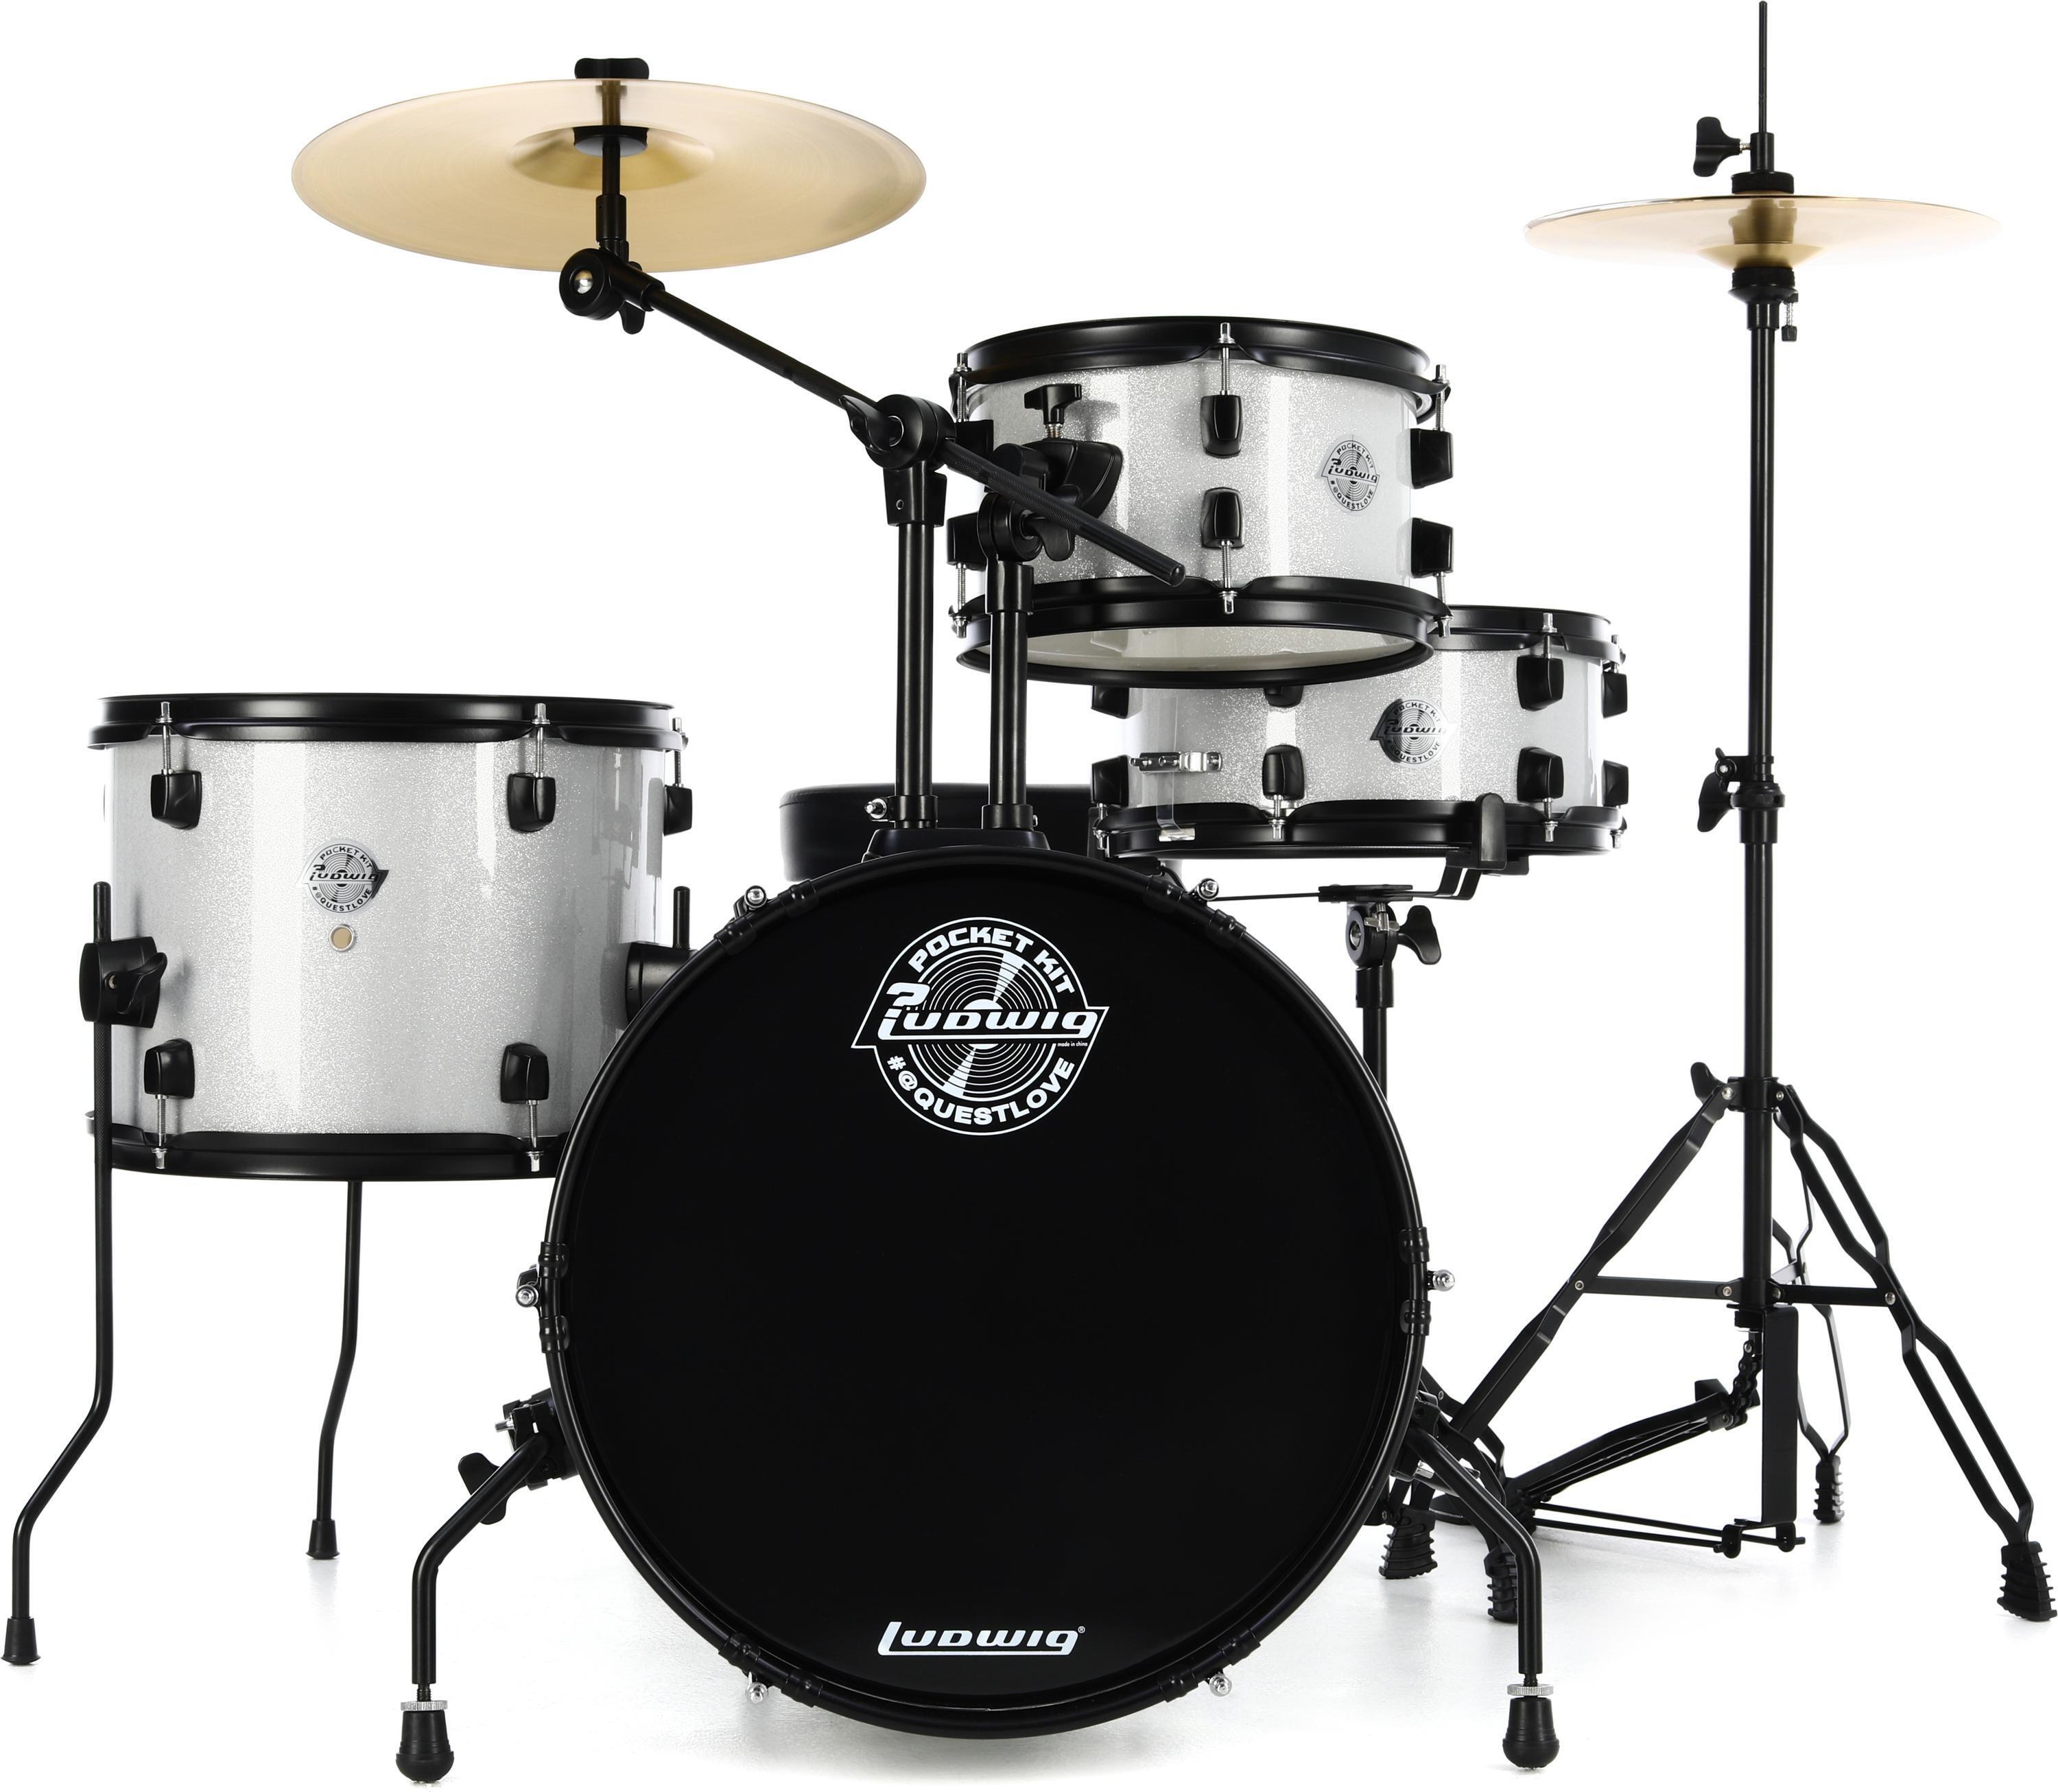 Ludwig Pocket Drum Set For Kids With Cymbals And Hardware